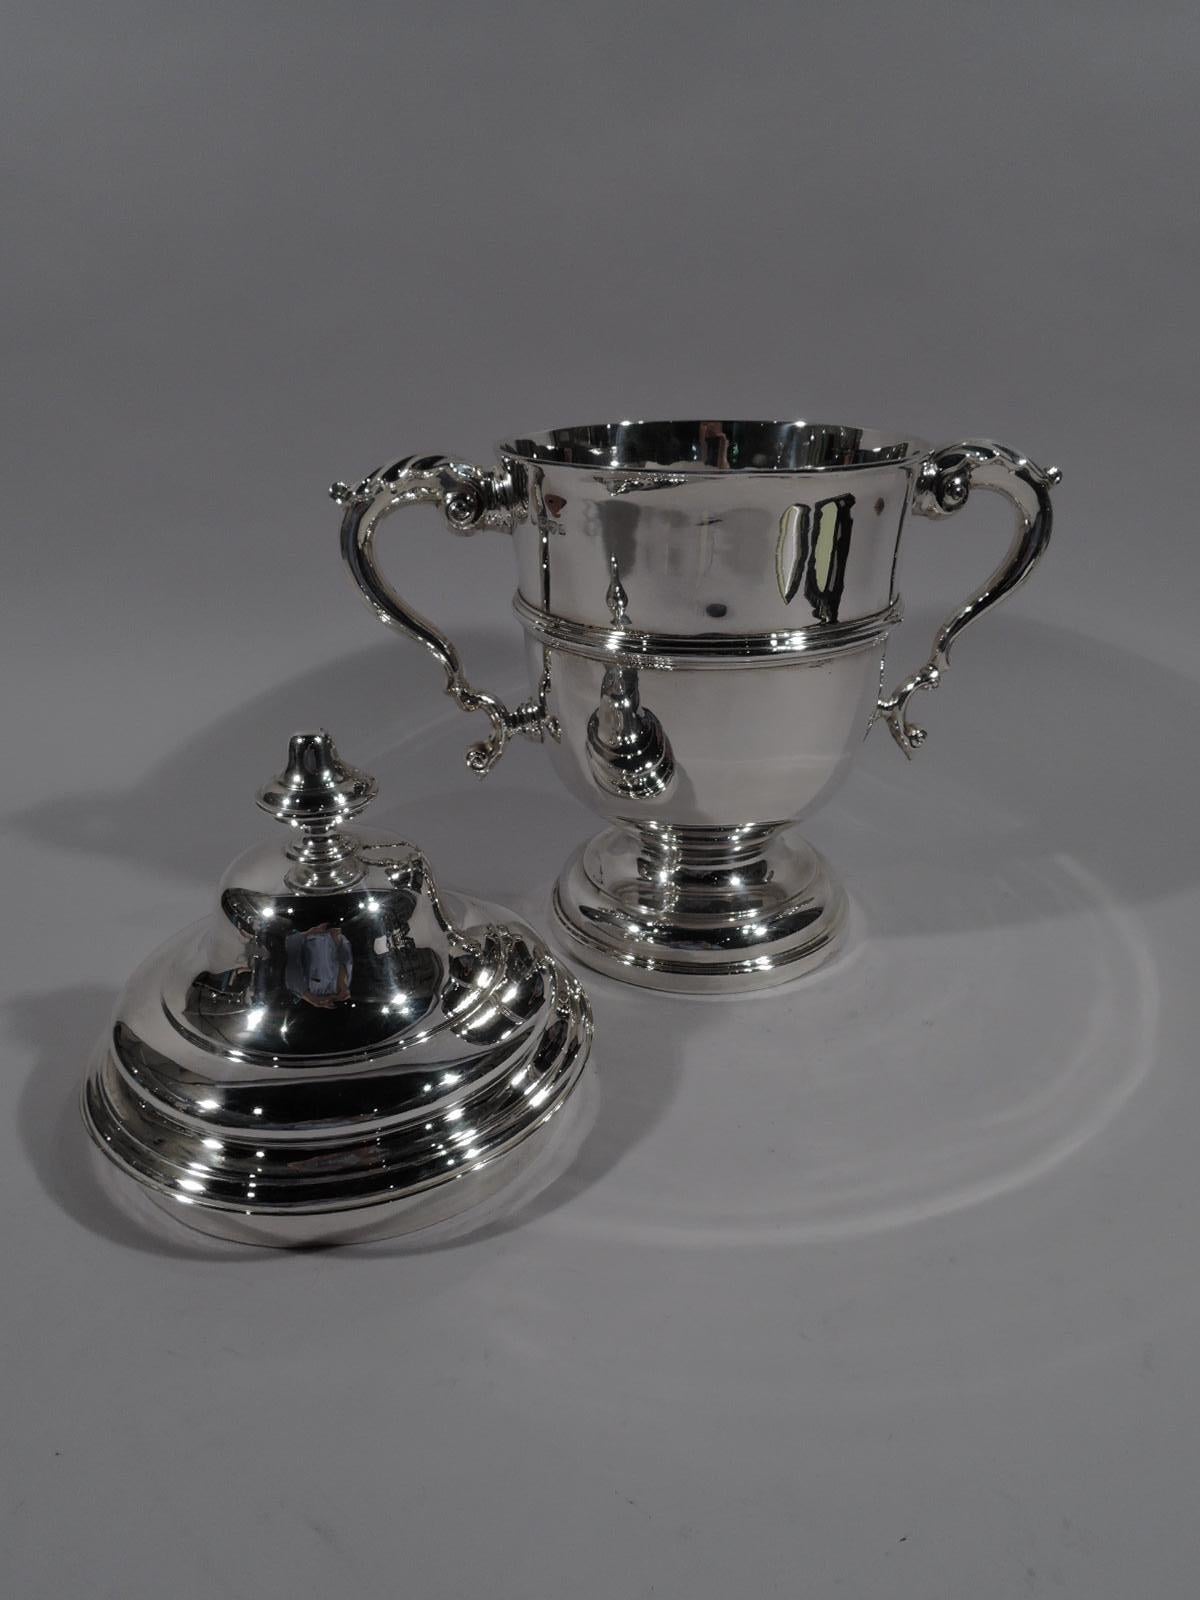 Edwardian Classical sterling silver covered trophy cup. Made by George Nathan & Ridley Hayes in Chester in 1905. Girdled urn with leaf-capped double-scroll handles and stepped and domed foot. Cover double domed with vase finial. Fully marked.